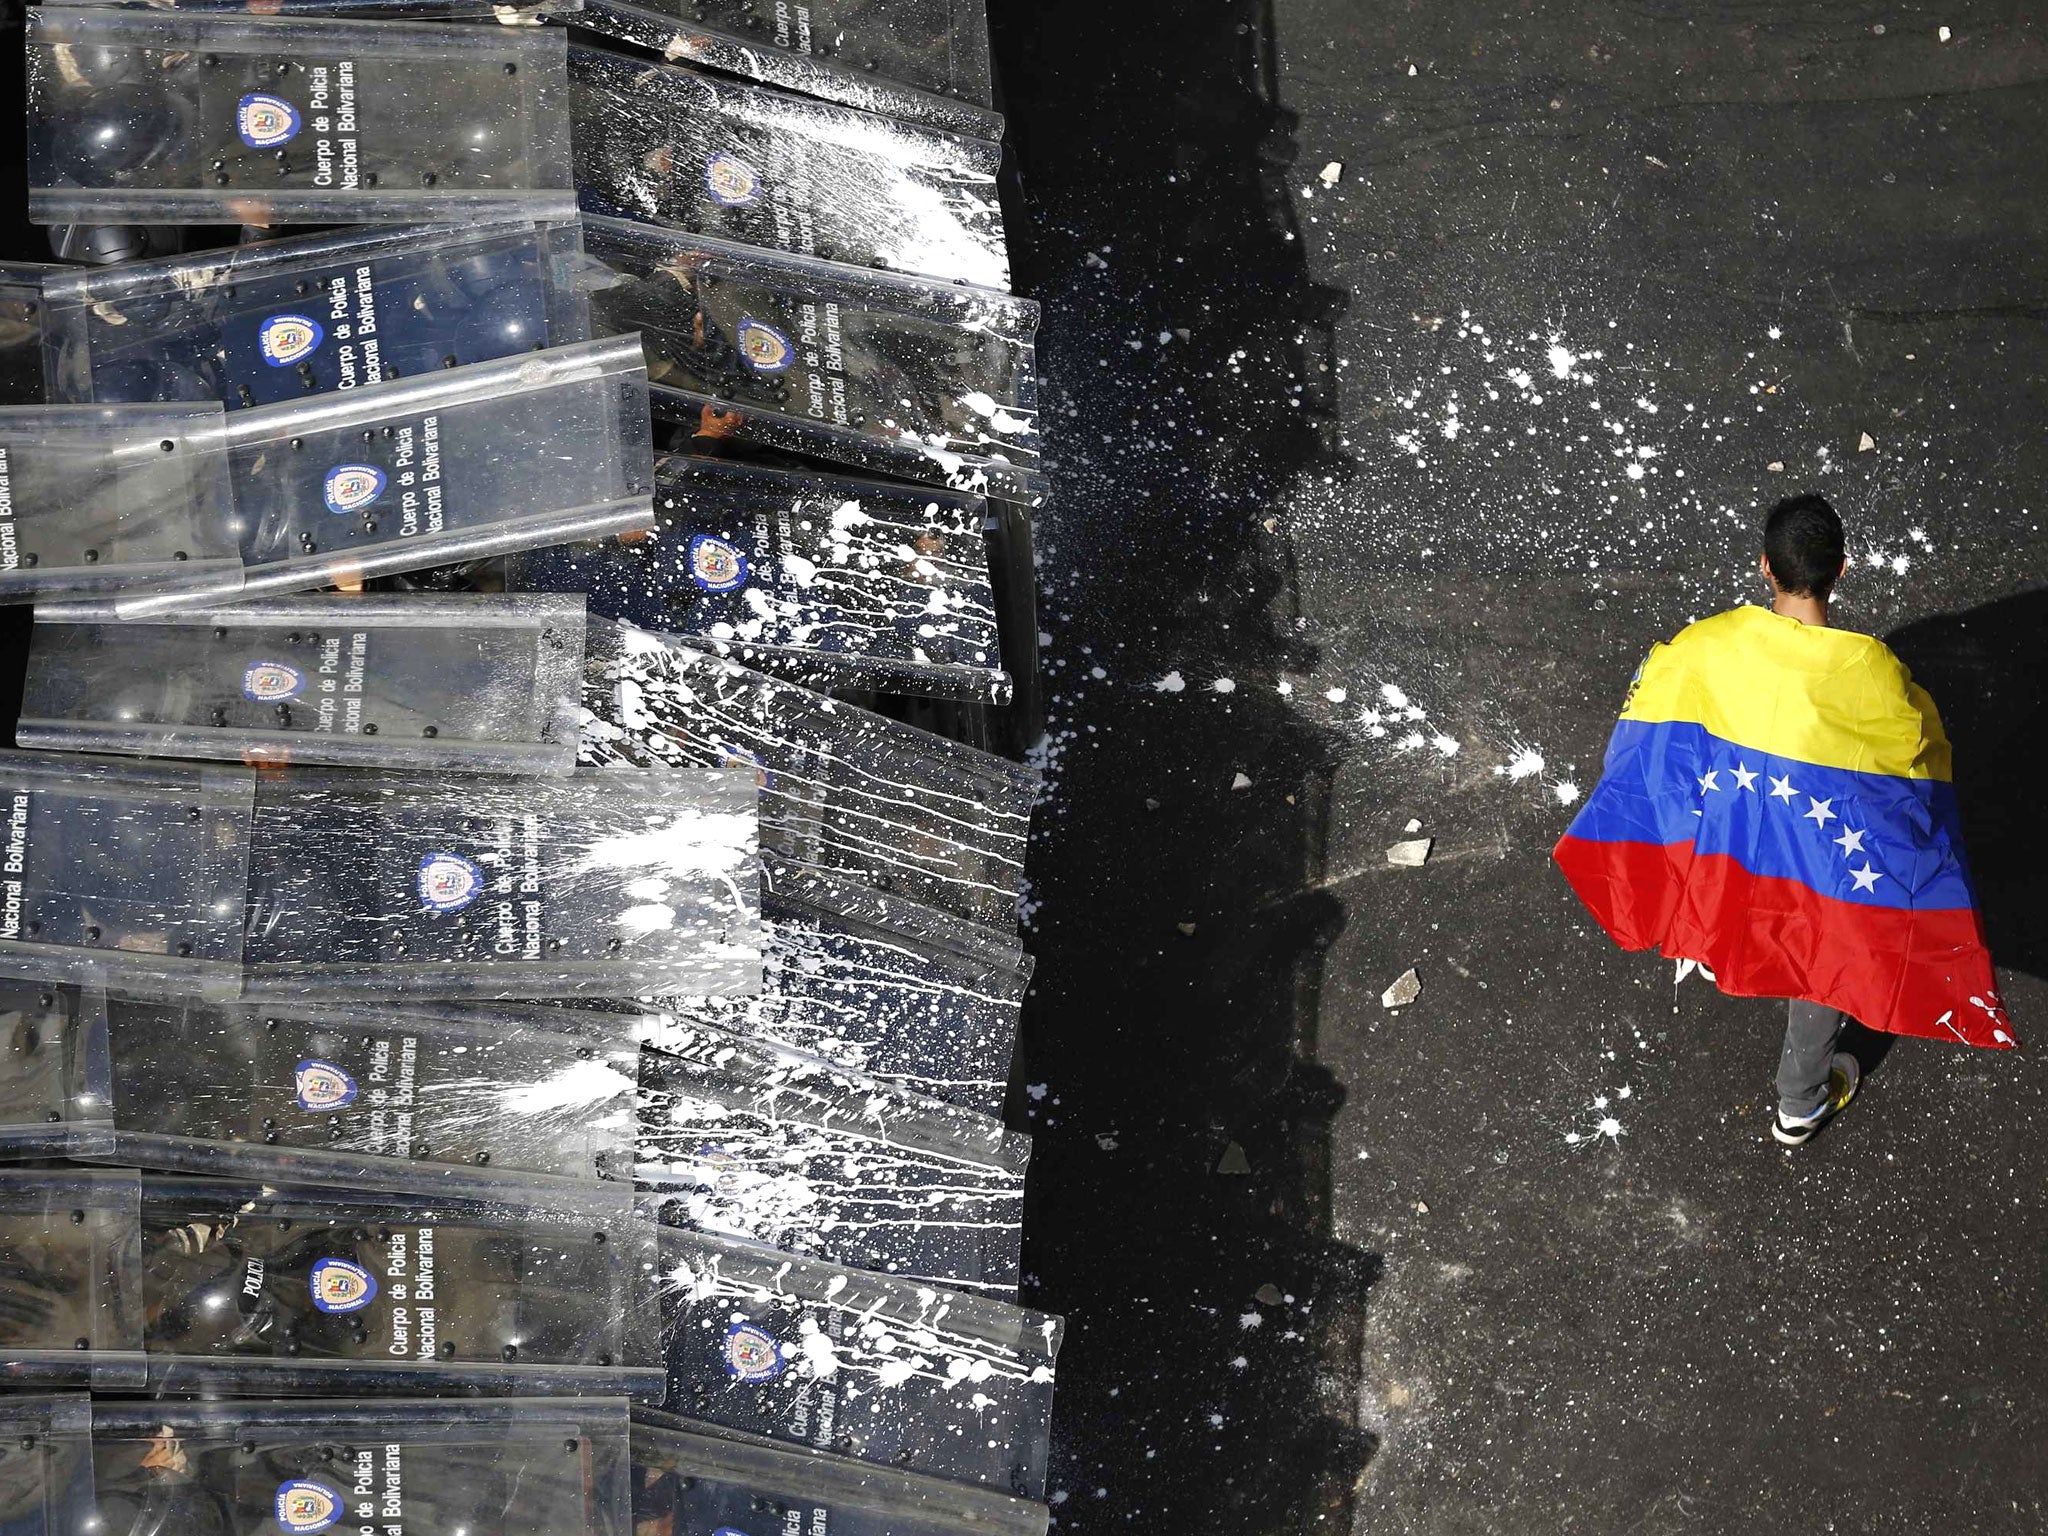 A demonstrator with a Venezuelan flag draped around himself protests against the government of Venezuela's President Nicolas Maduro, in front of a riot police line in Caracas